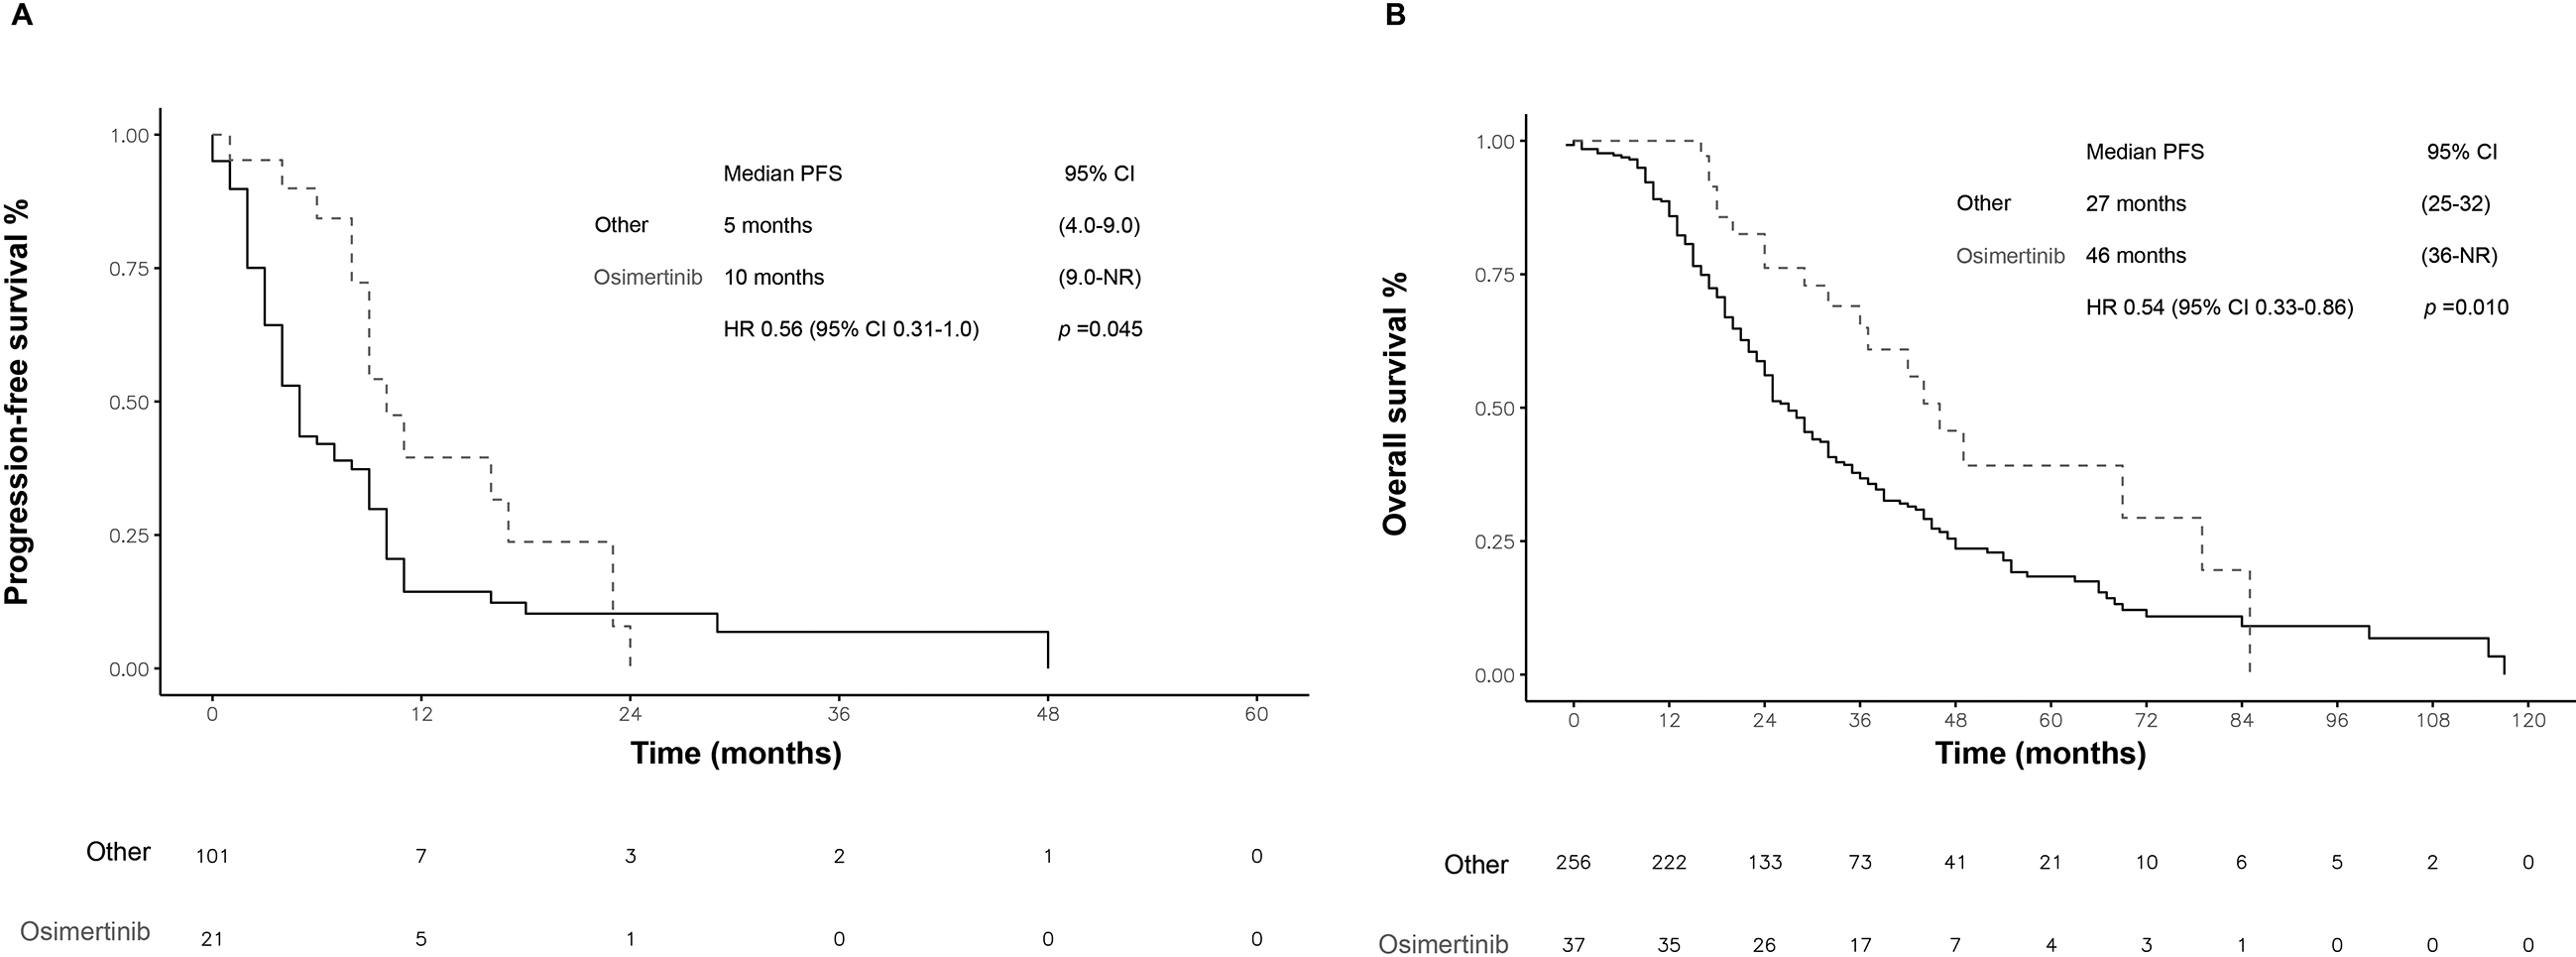 Survival of patients with T790M mutation at disease progression. A) PFS of patients treated with osimertinib versus those treated with other drugs. B) Overall survival (OS) in patients treated with osimertinib vs. other treatments. PFS: progression-free survival. CI: confidence interval. NR: not rated. HR: hazard ratio. Statistical significance was set at a p-value < 0.05.